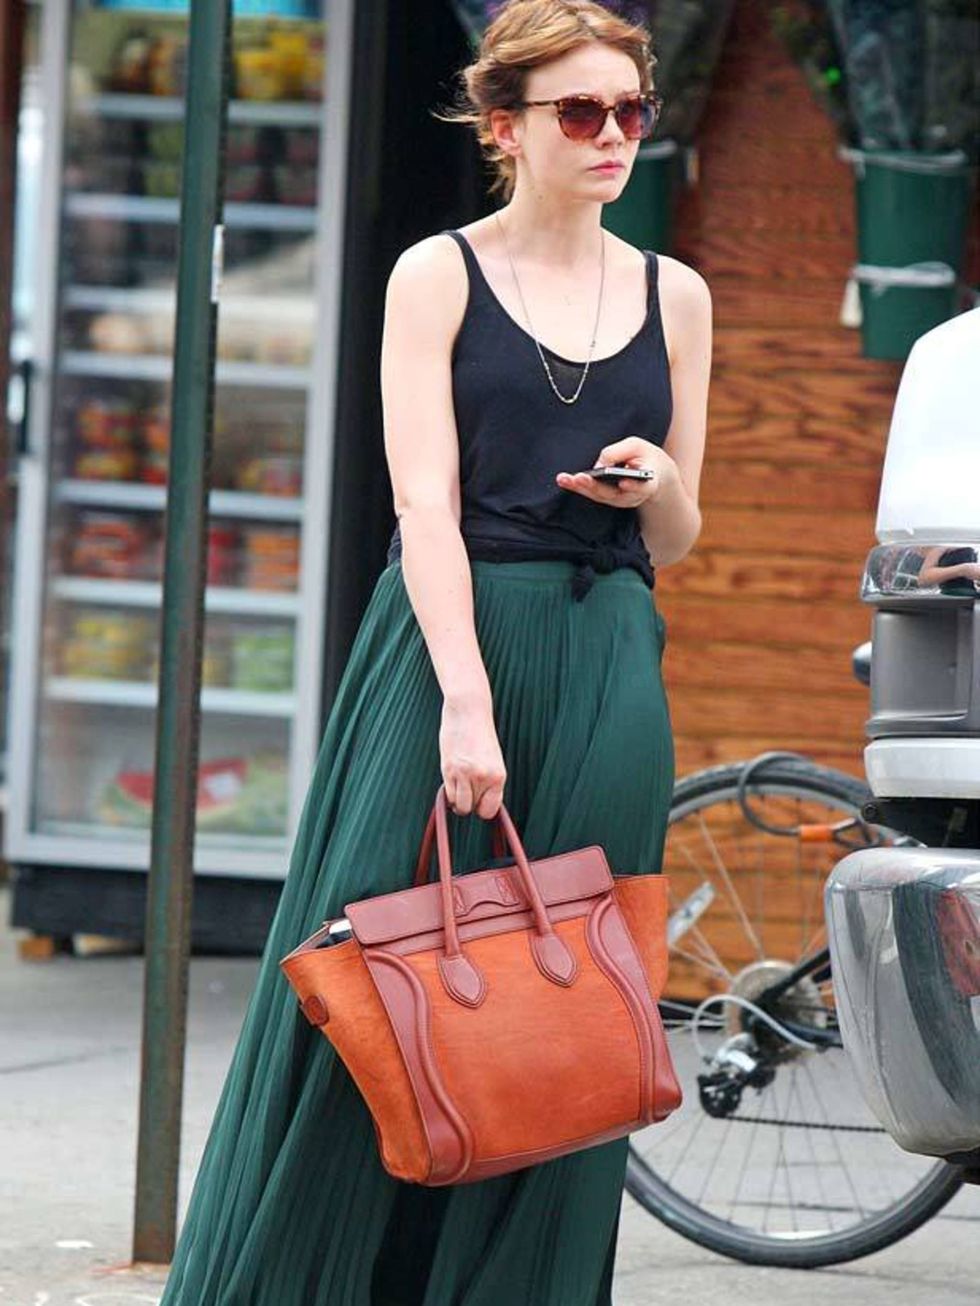 <p><a href="http://www.elleuk.com/starstyle/style-files/(section)/carey-mulligan">Carey Mulligan</a> colour-blocking a green pleaated maxi skirt and <a href="http://www.elleuk.com/catwalk/collections/celine">Celine</a> bag</p>